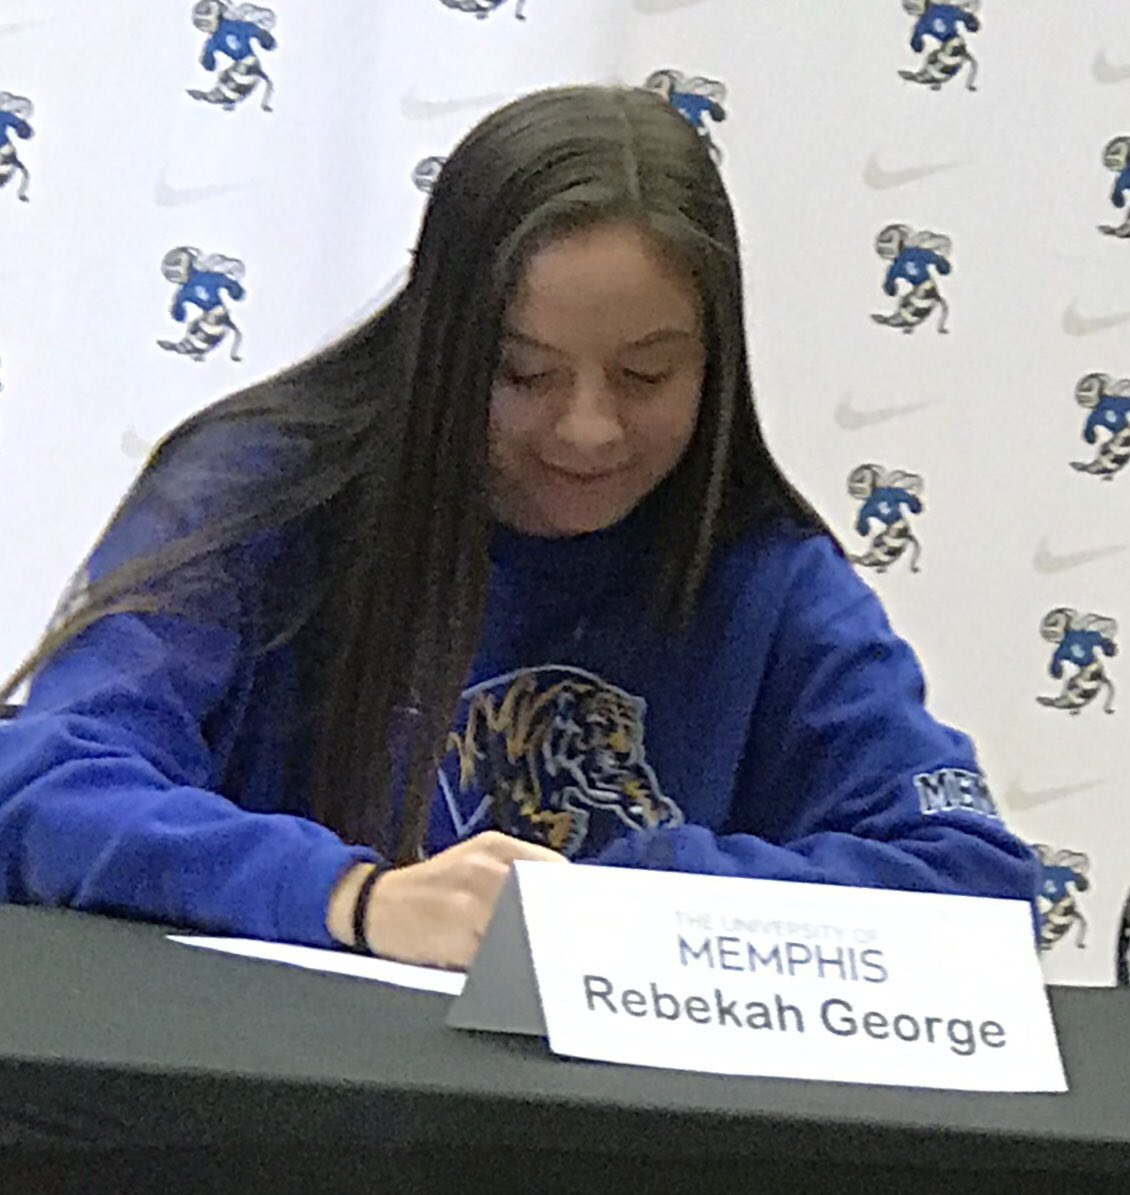 Congratulations @rebekahgeorge01 for signing with Memphis today! We are so proud! #futuretiger